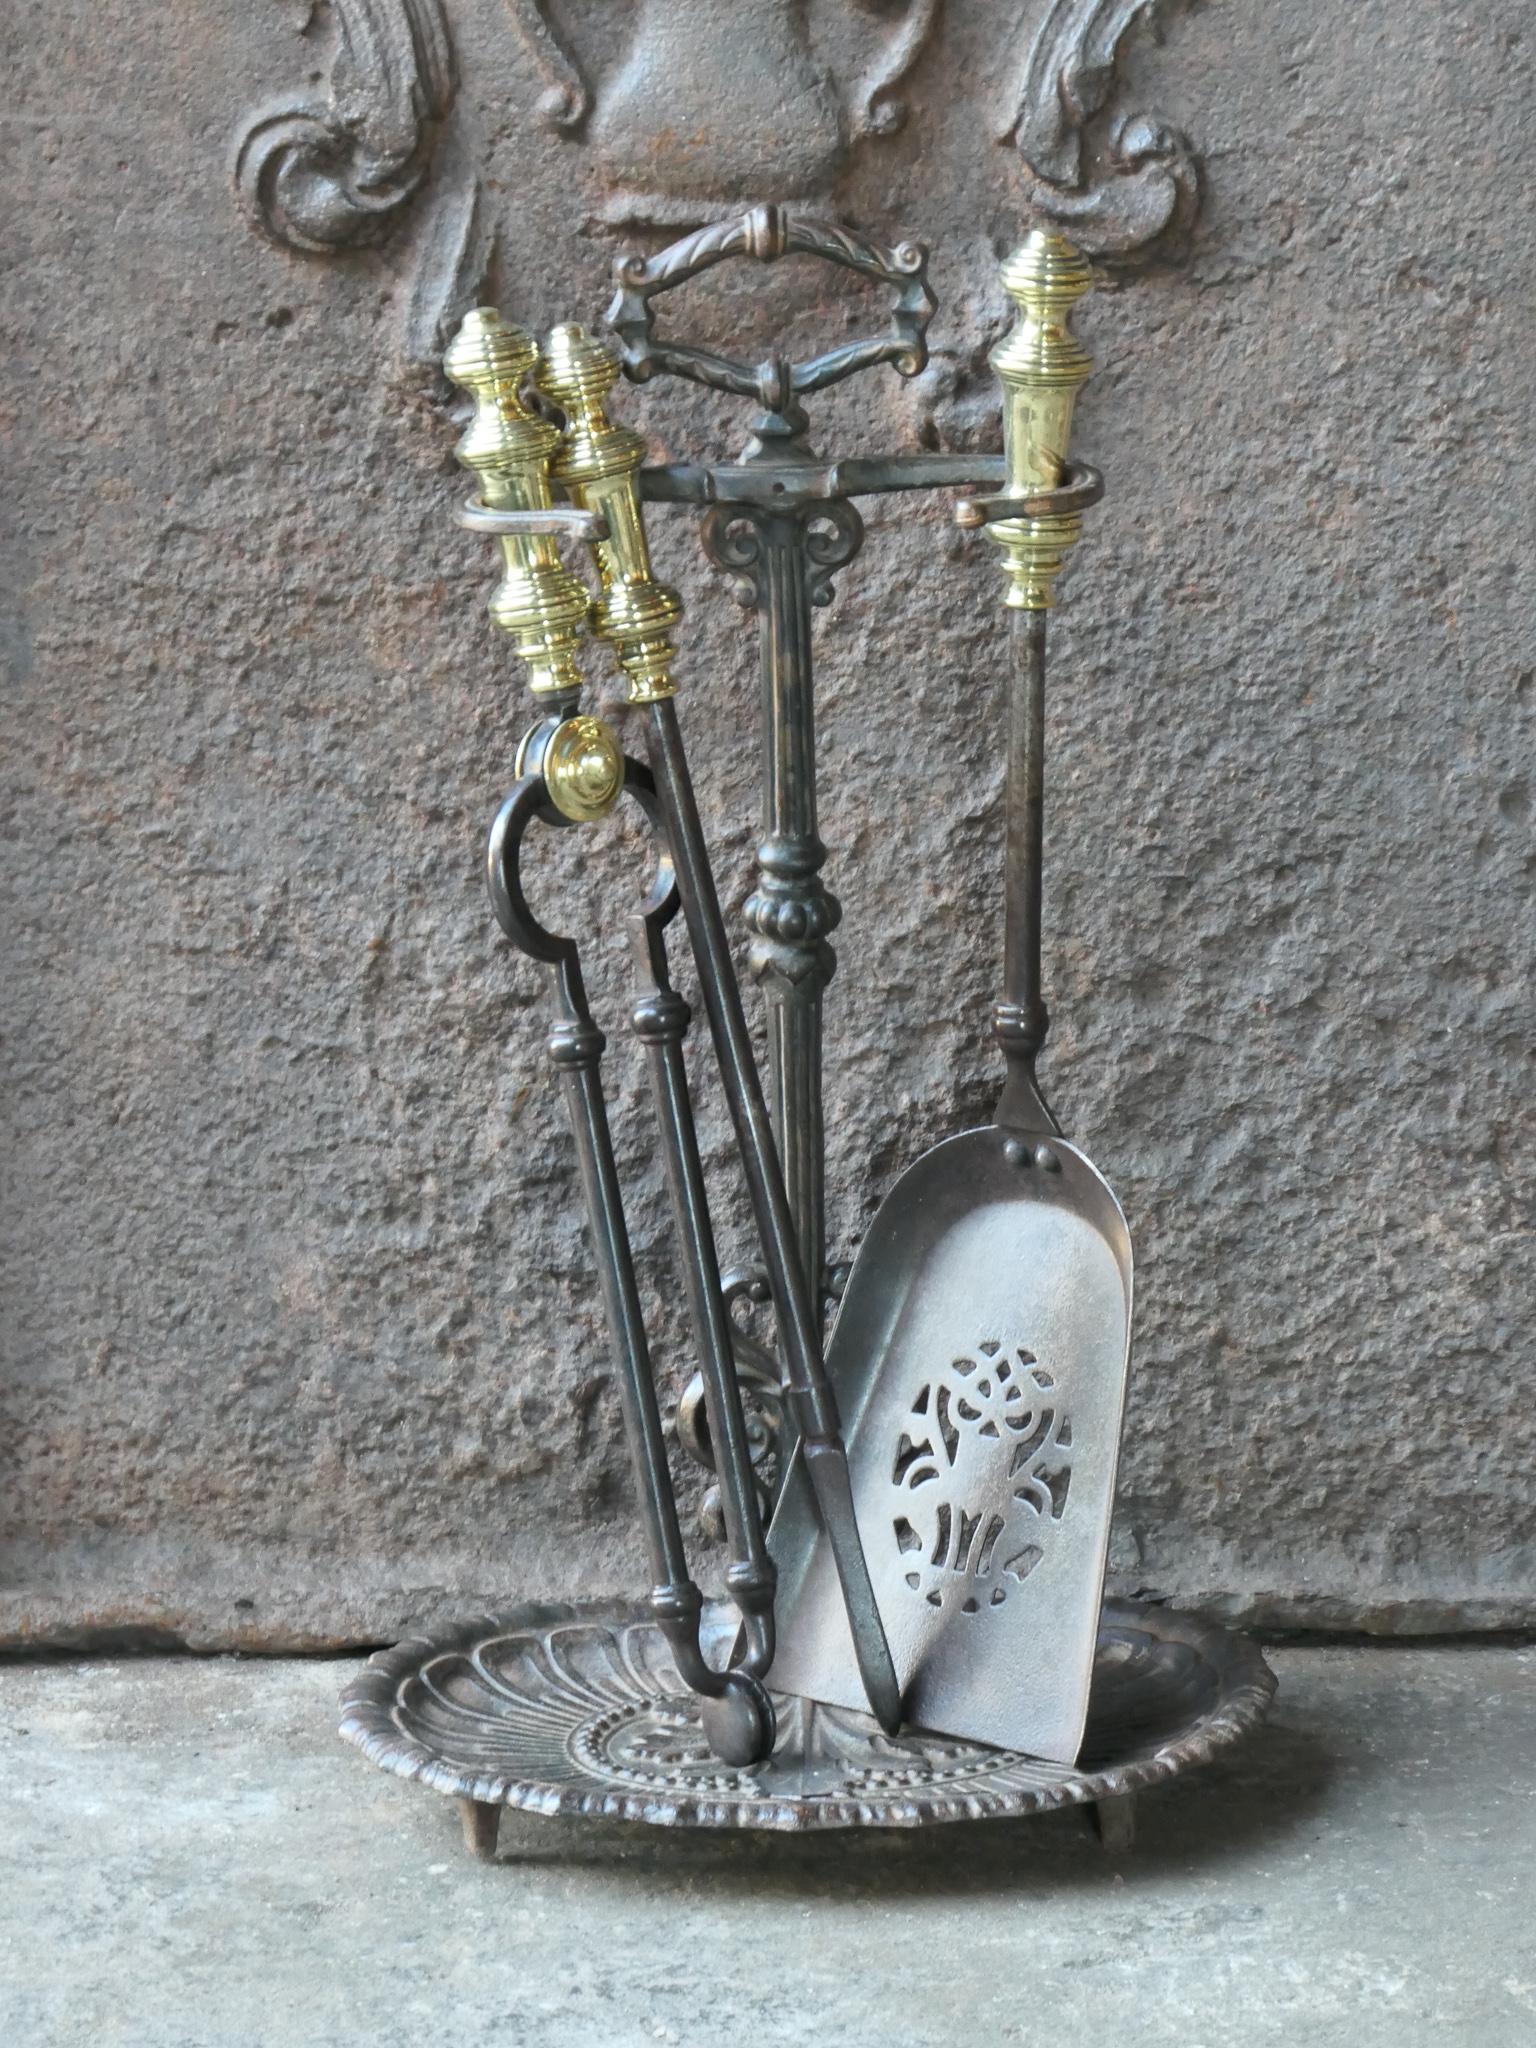 Beautiful small 19th century English Victorian fireplace tool set. The tool set consists of tongs, shovel, poker and stand. The stand is made of wrought iron with a cast iron base, and the tools are made of wrought iron with polished brass